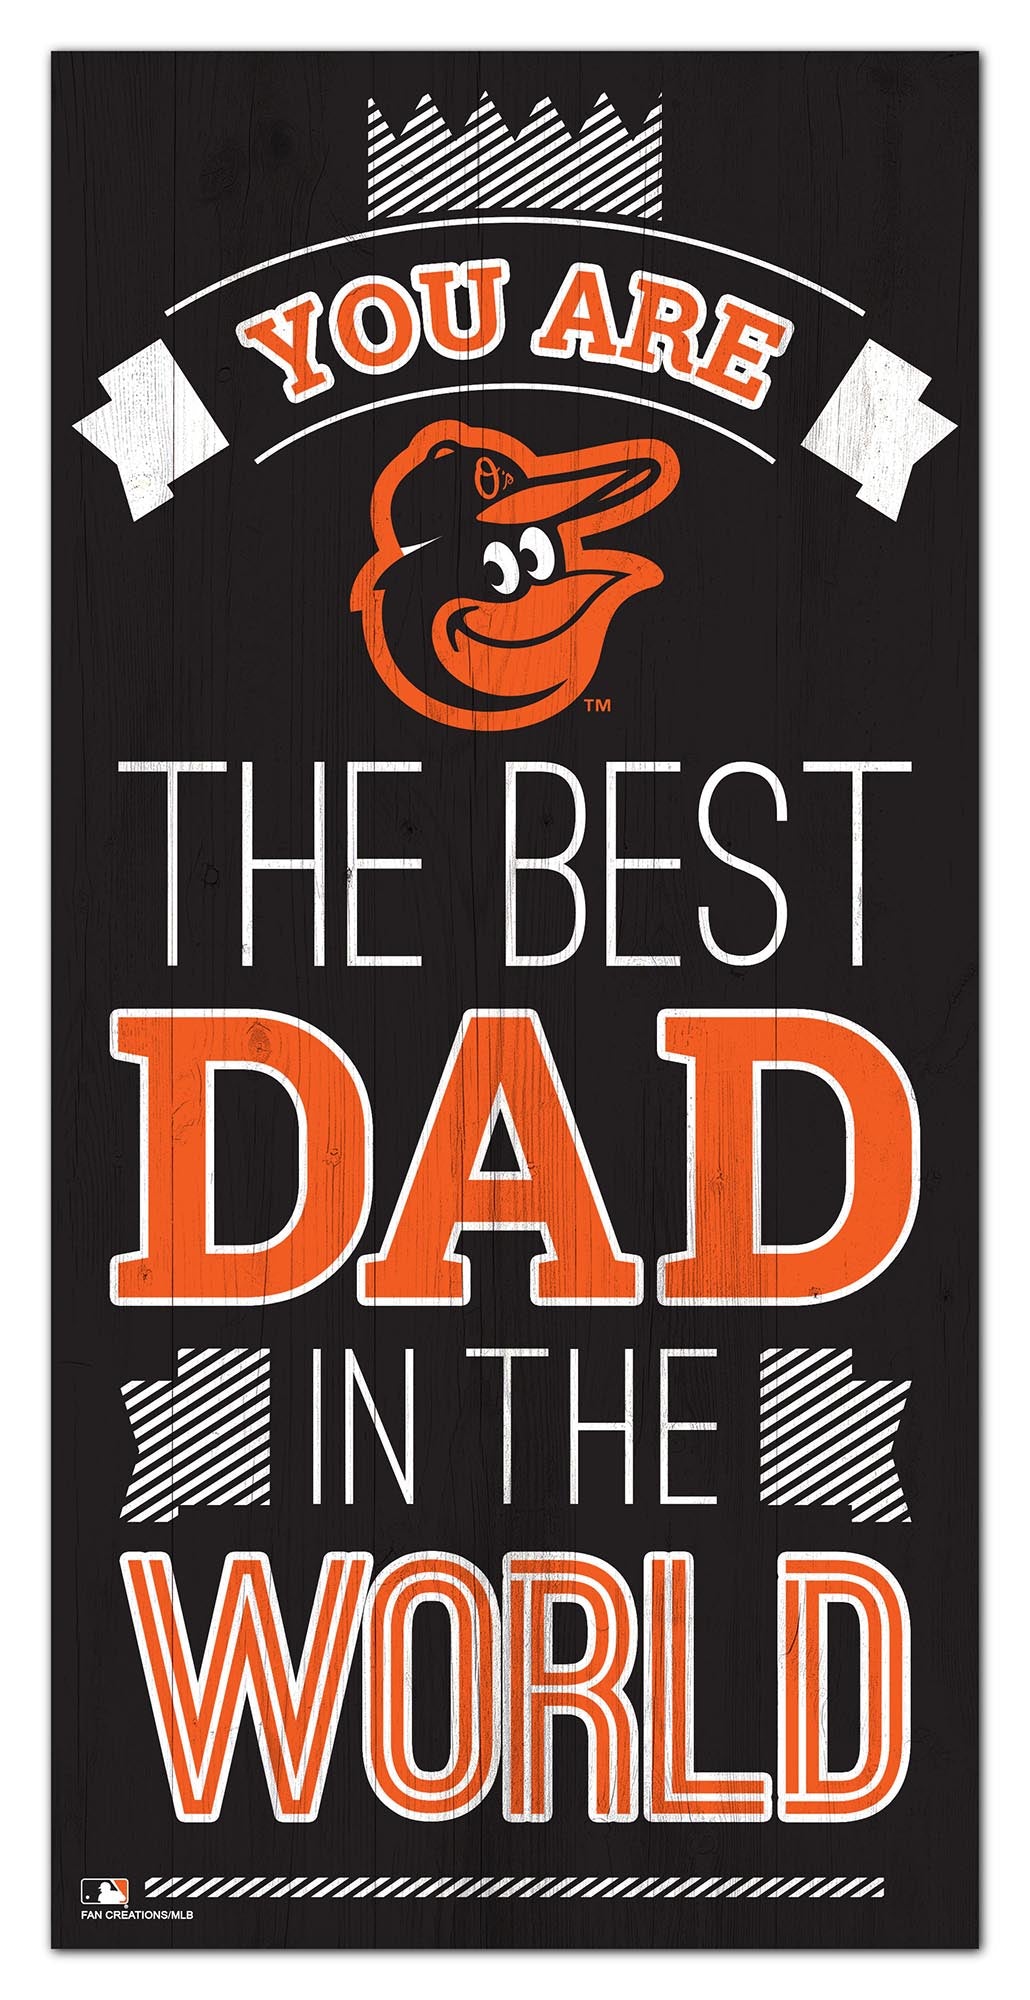 Baltimore Orioles Best Dad Wood Sign